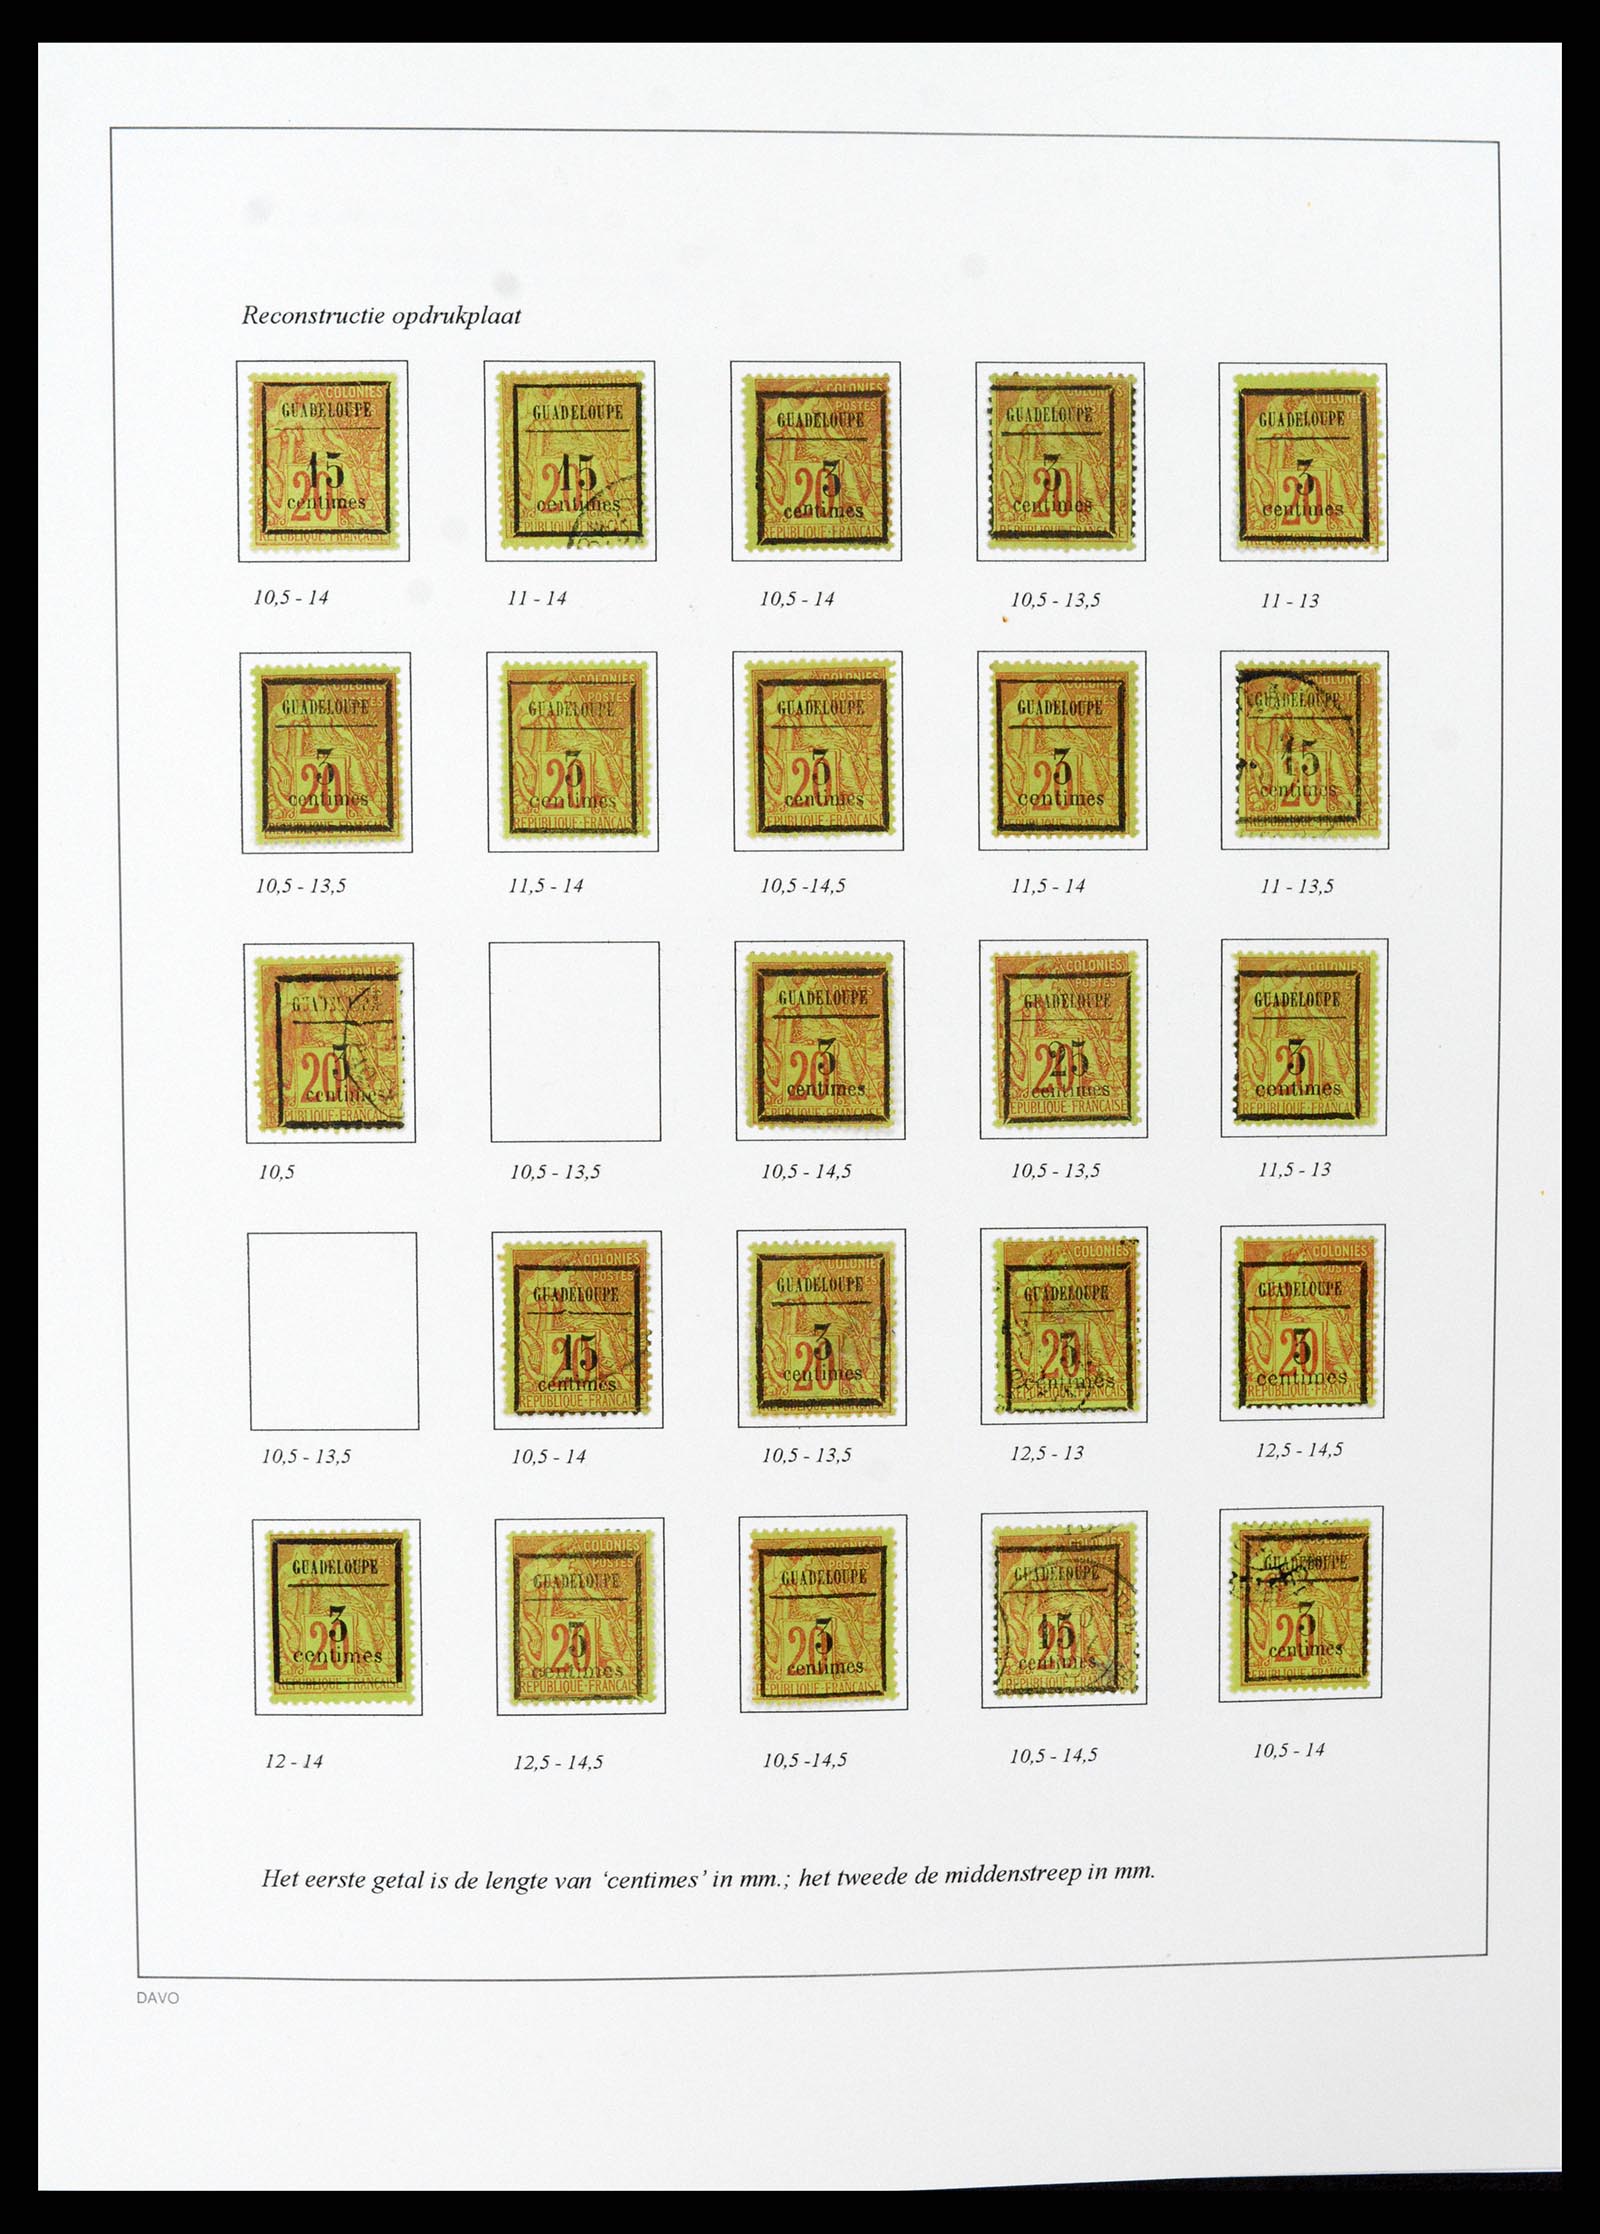 37480 038 - Stamp collection 37480 Guadeloupe supercollection 1823-1947.